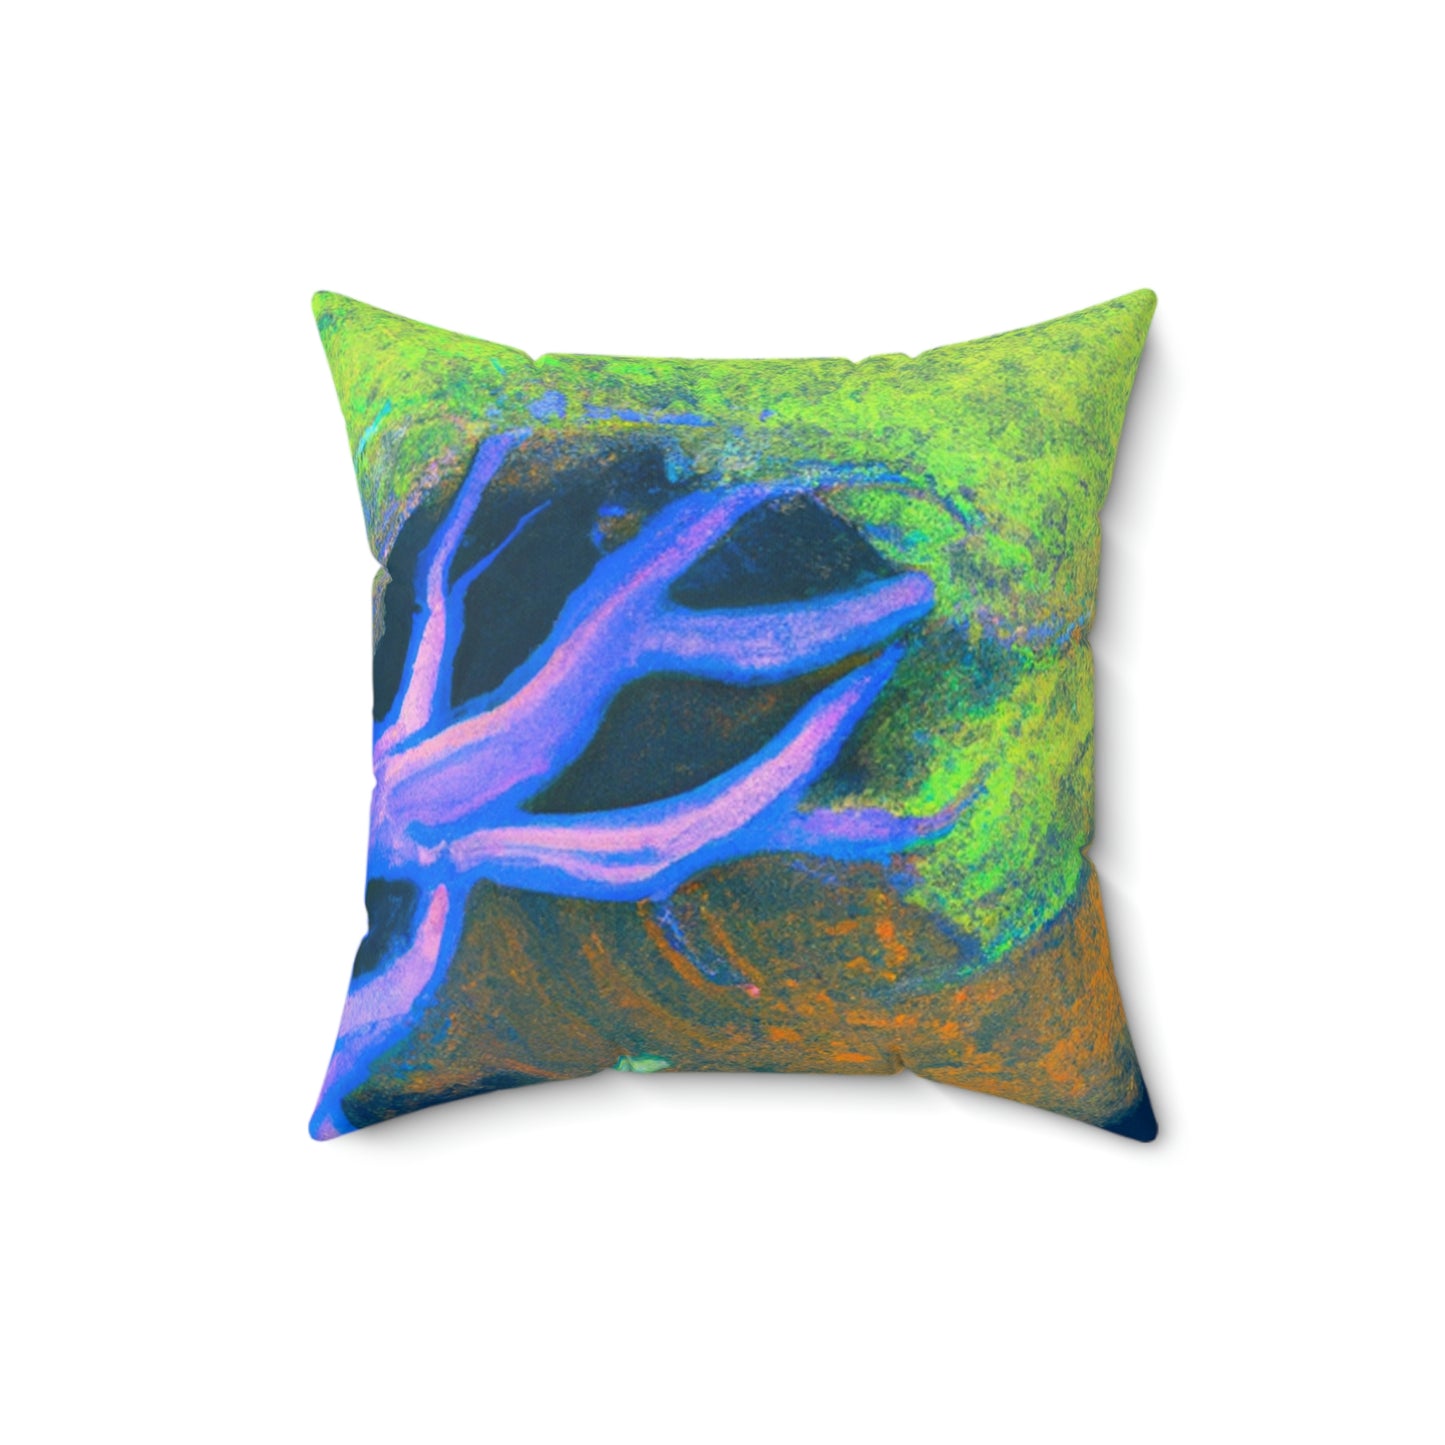 "The Enchanted Tree" - The Alien Square Pillow